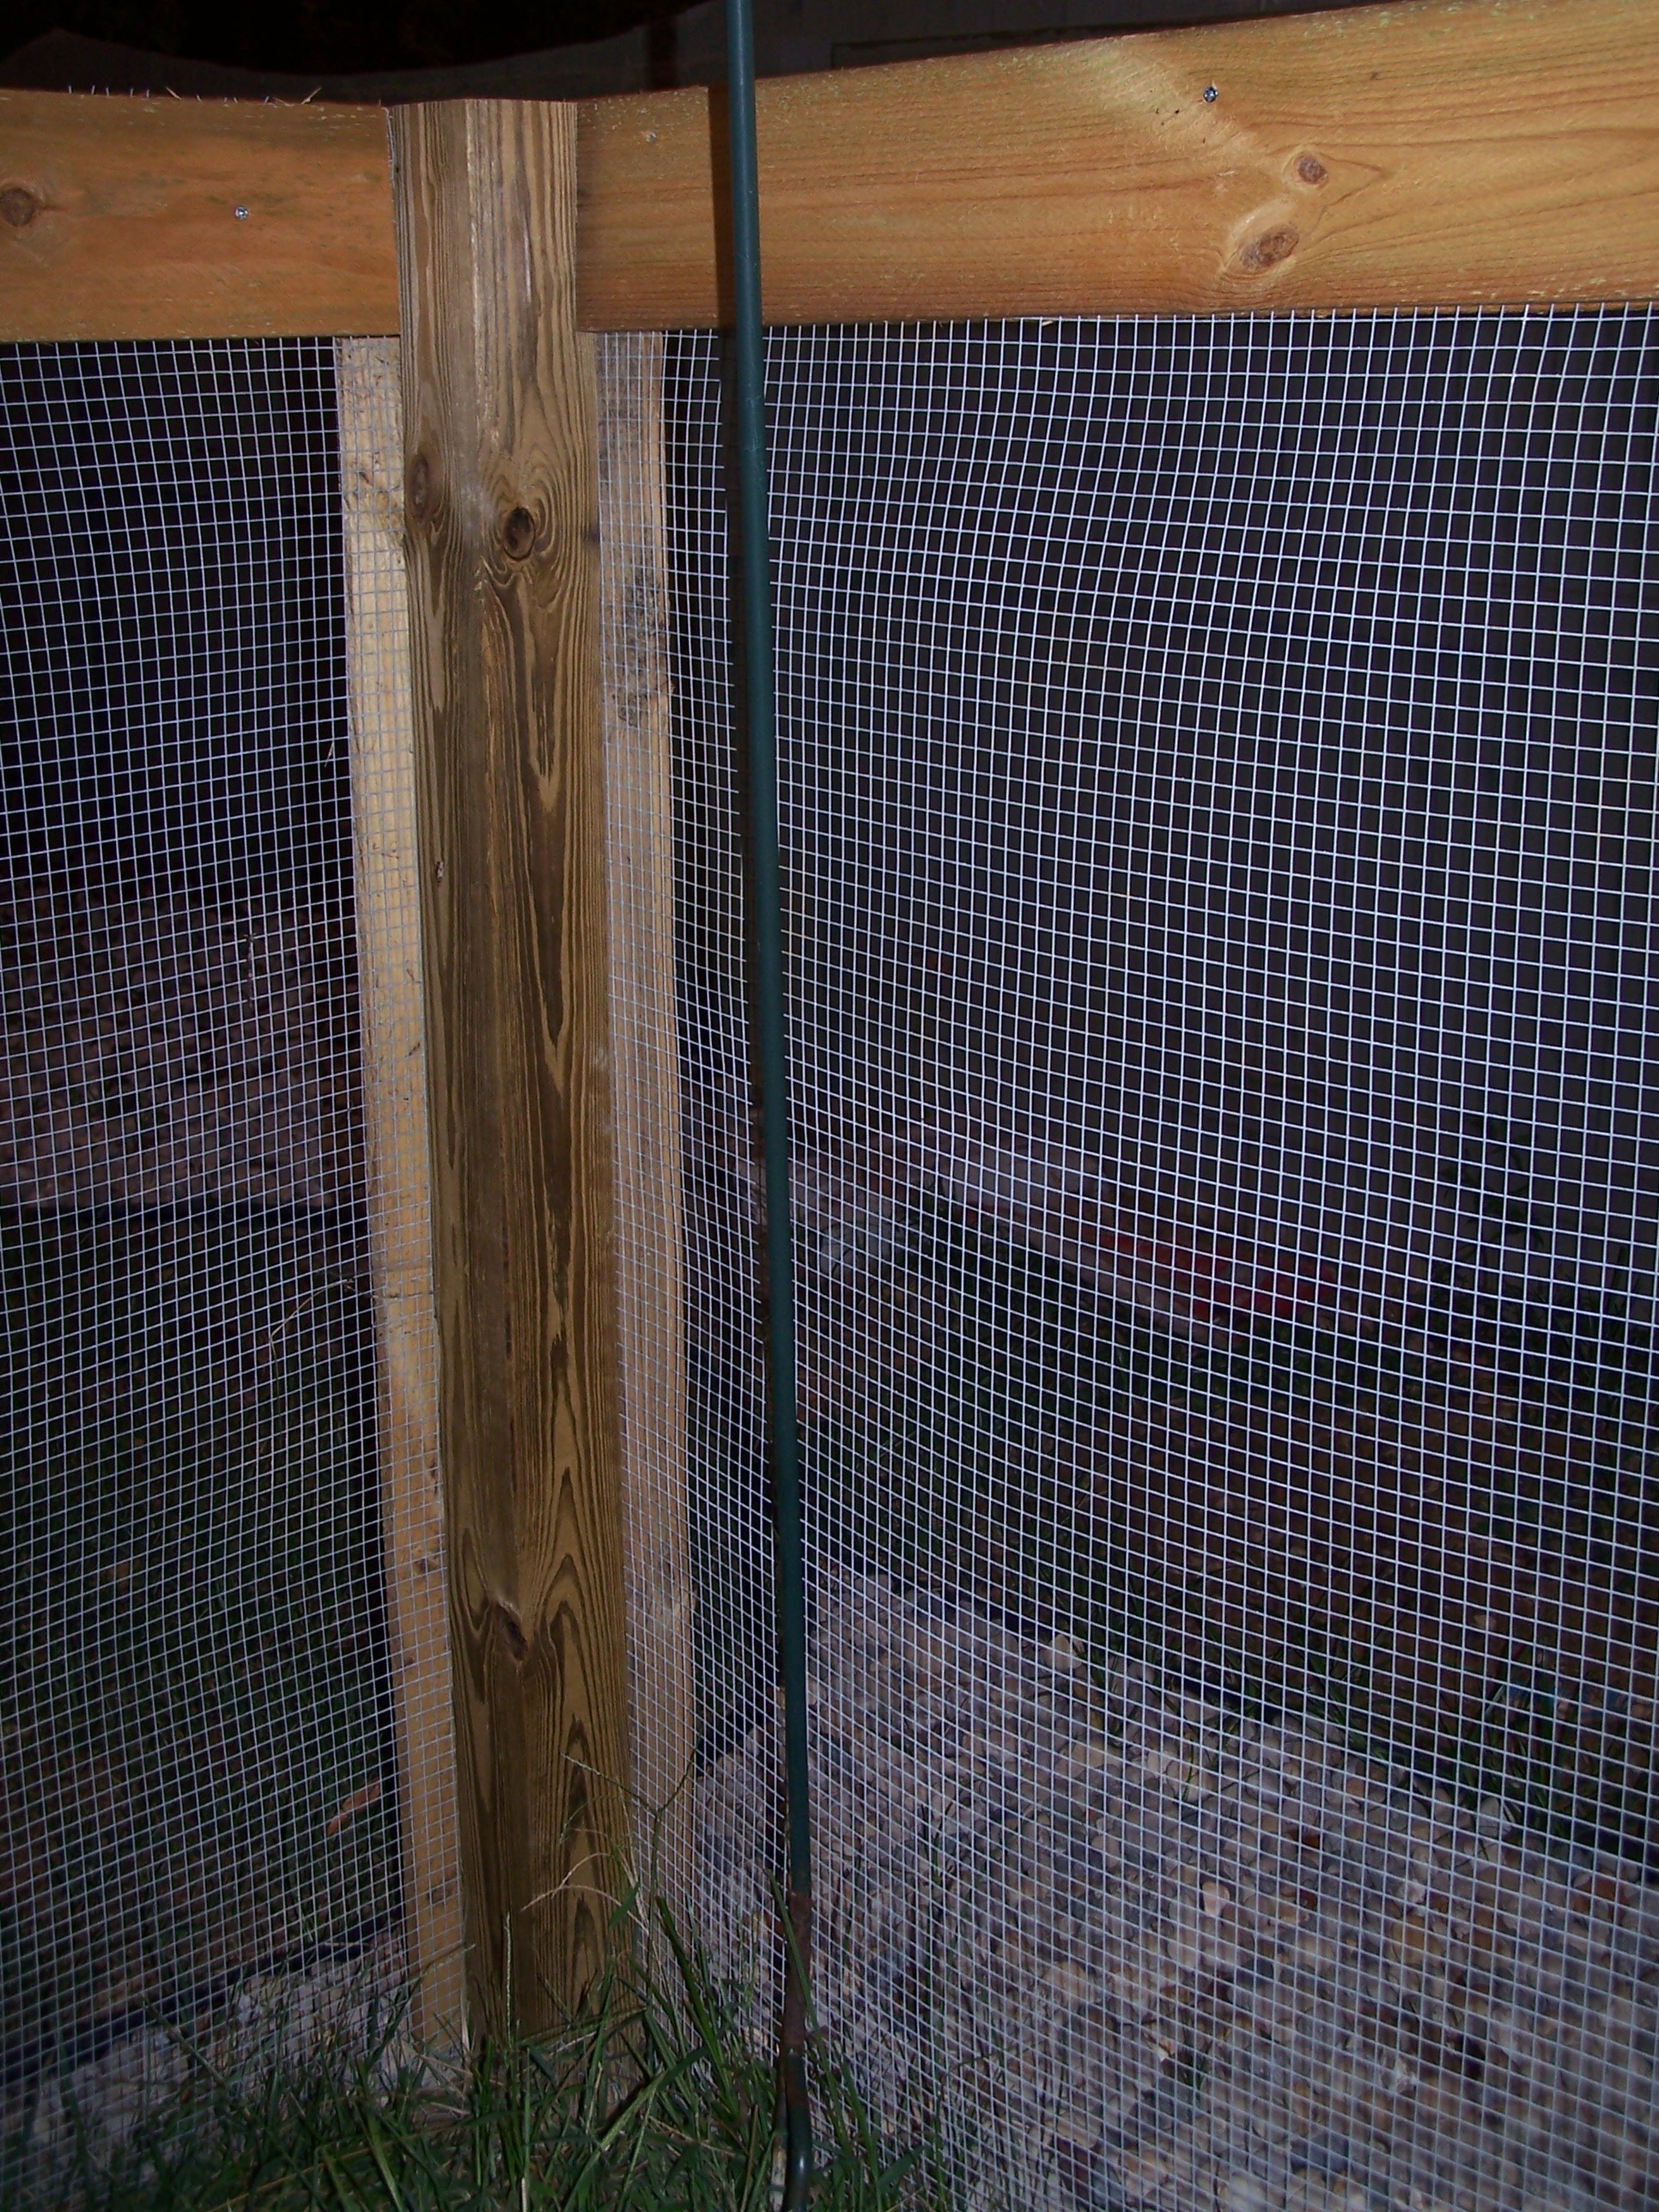 A shot of the hardware cloth fencing I constructed to keep the chicken-killing basset hound out.